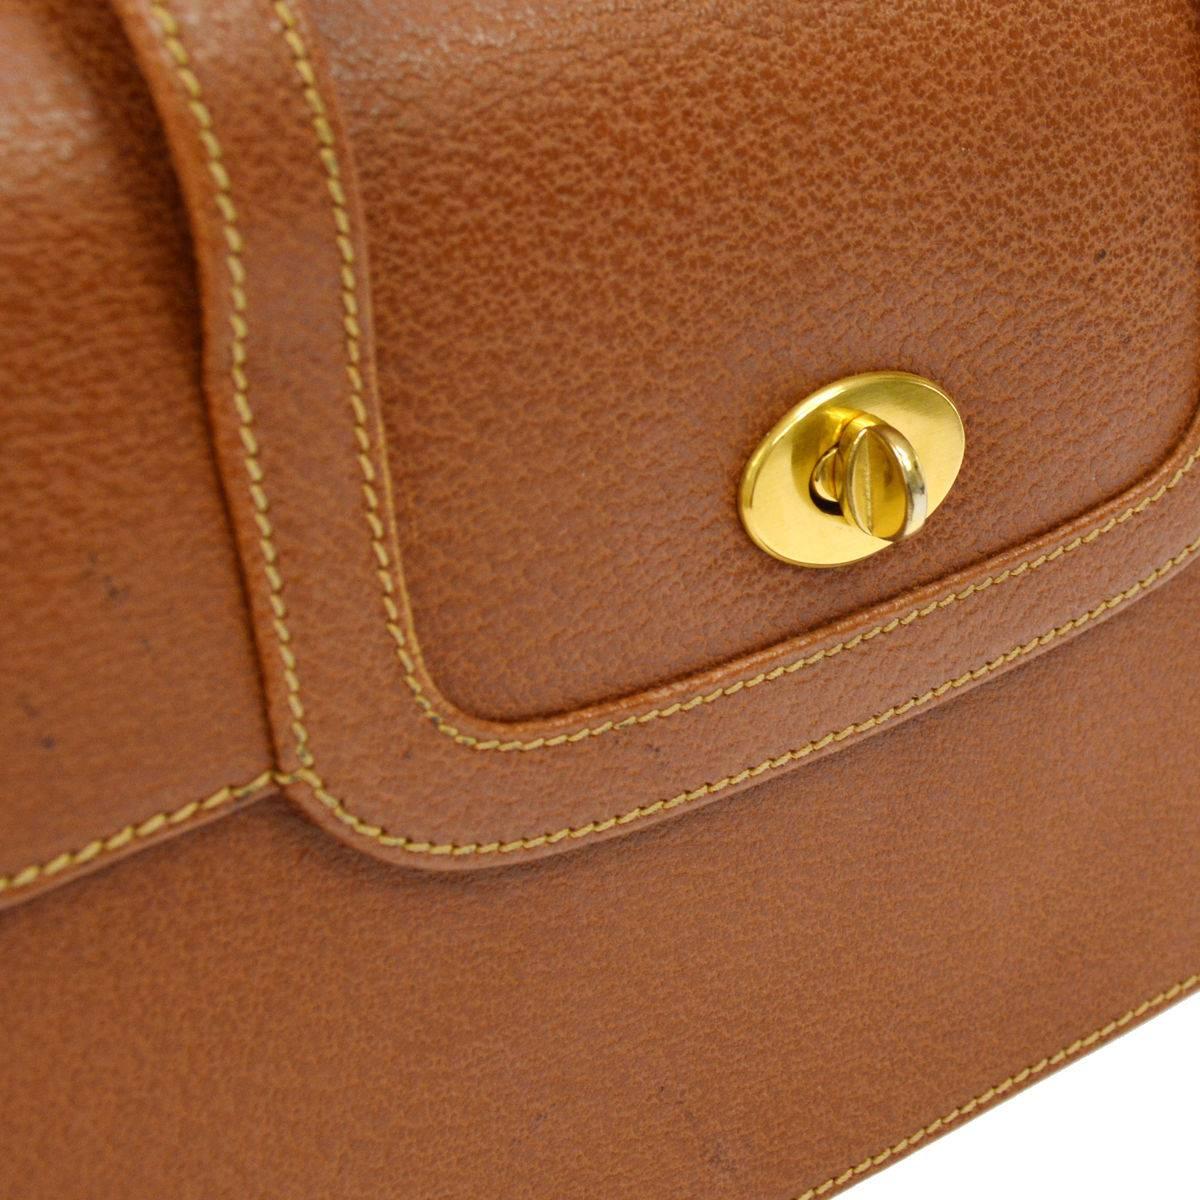 CURATOR'S NOTES

Gucci Vintage Cognac Leather Top Handle Kelly Style Satchel Crossbody Bag  

Leather
Gold tone hardware
Turnlock closure
Leather lining
Made in Italy
Top handle 3"
Measures 9.5" W x 6.25" H x 3" D 
Shoulder strap